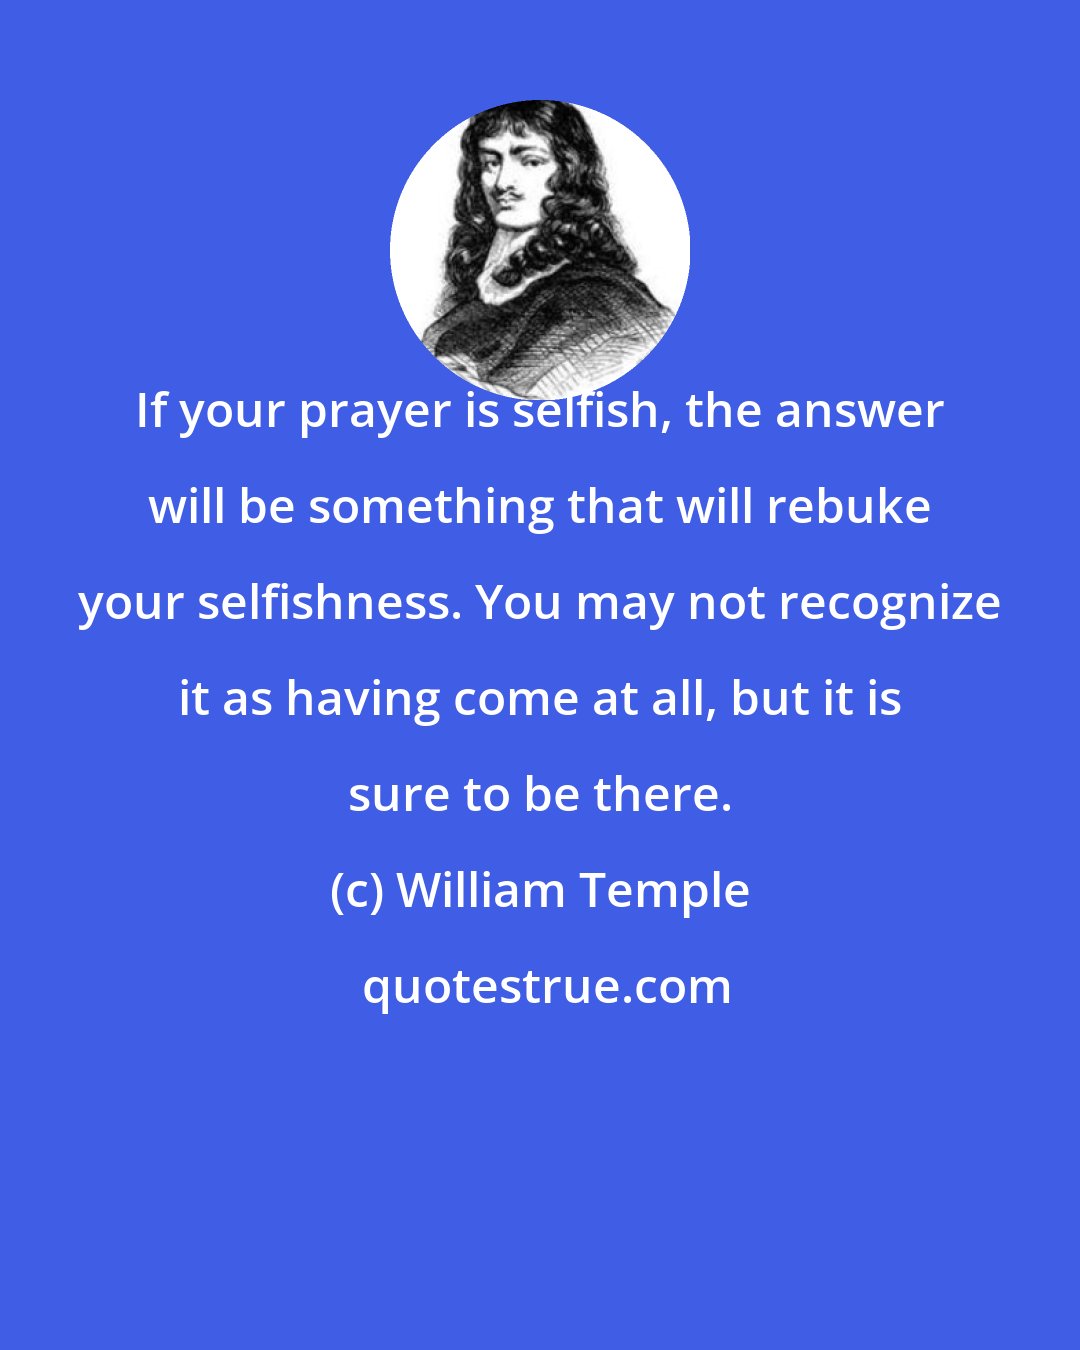 William Temple: If your prayer is selfish, the answer will be something that will rebuke your selfishness. You may not recognize it as having come at all, but it is sure to be there.